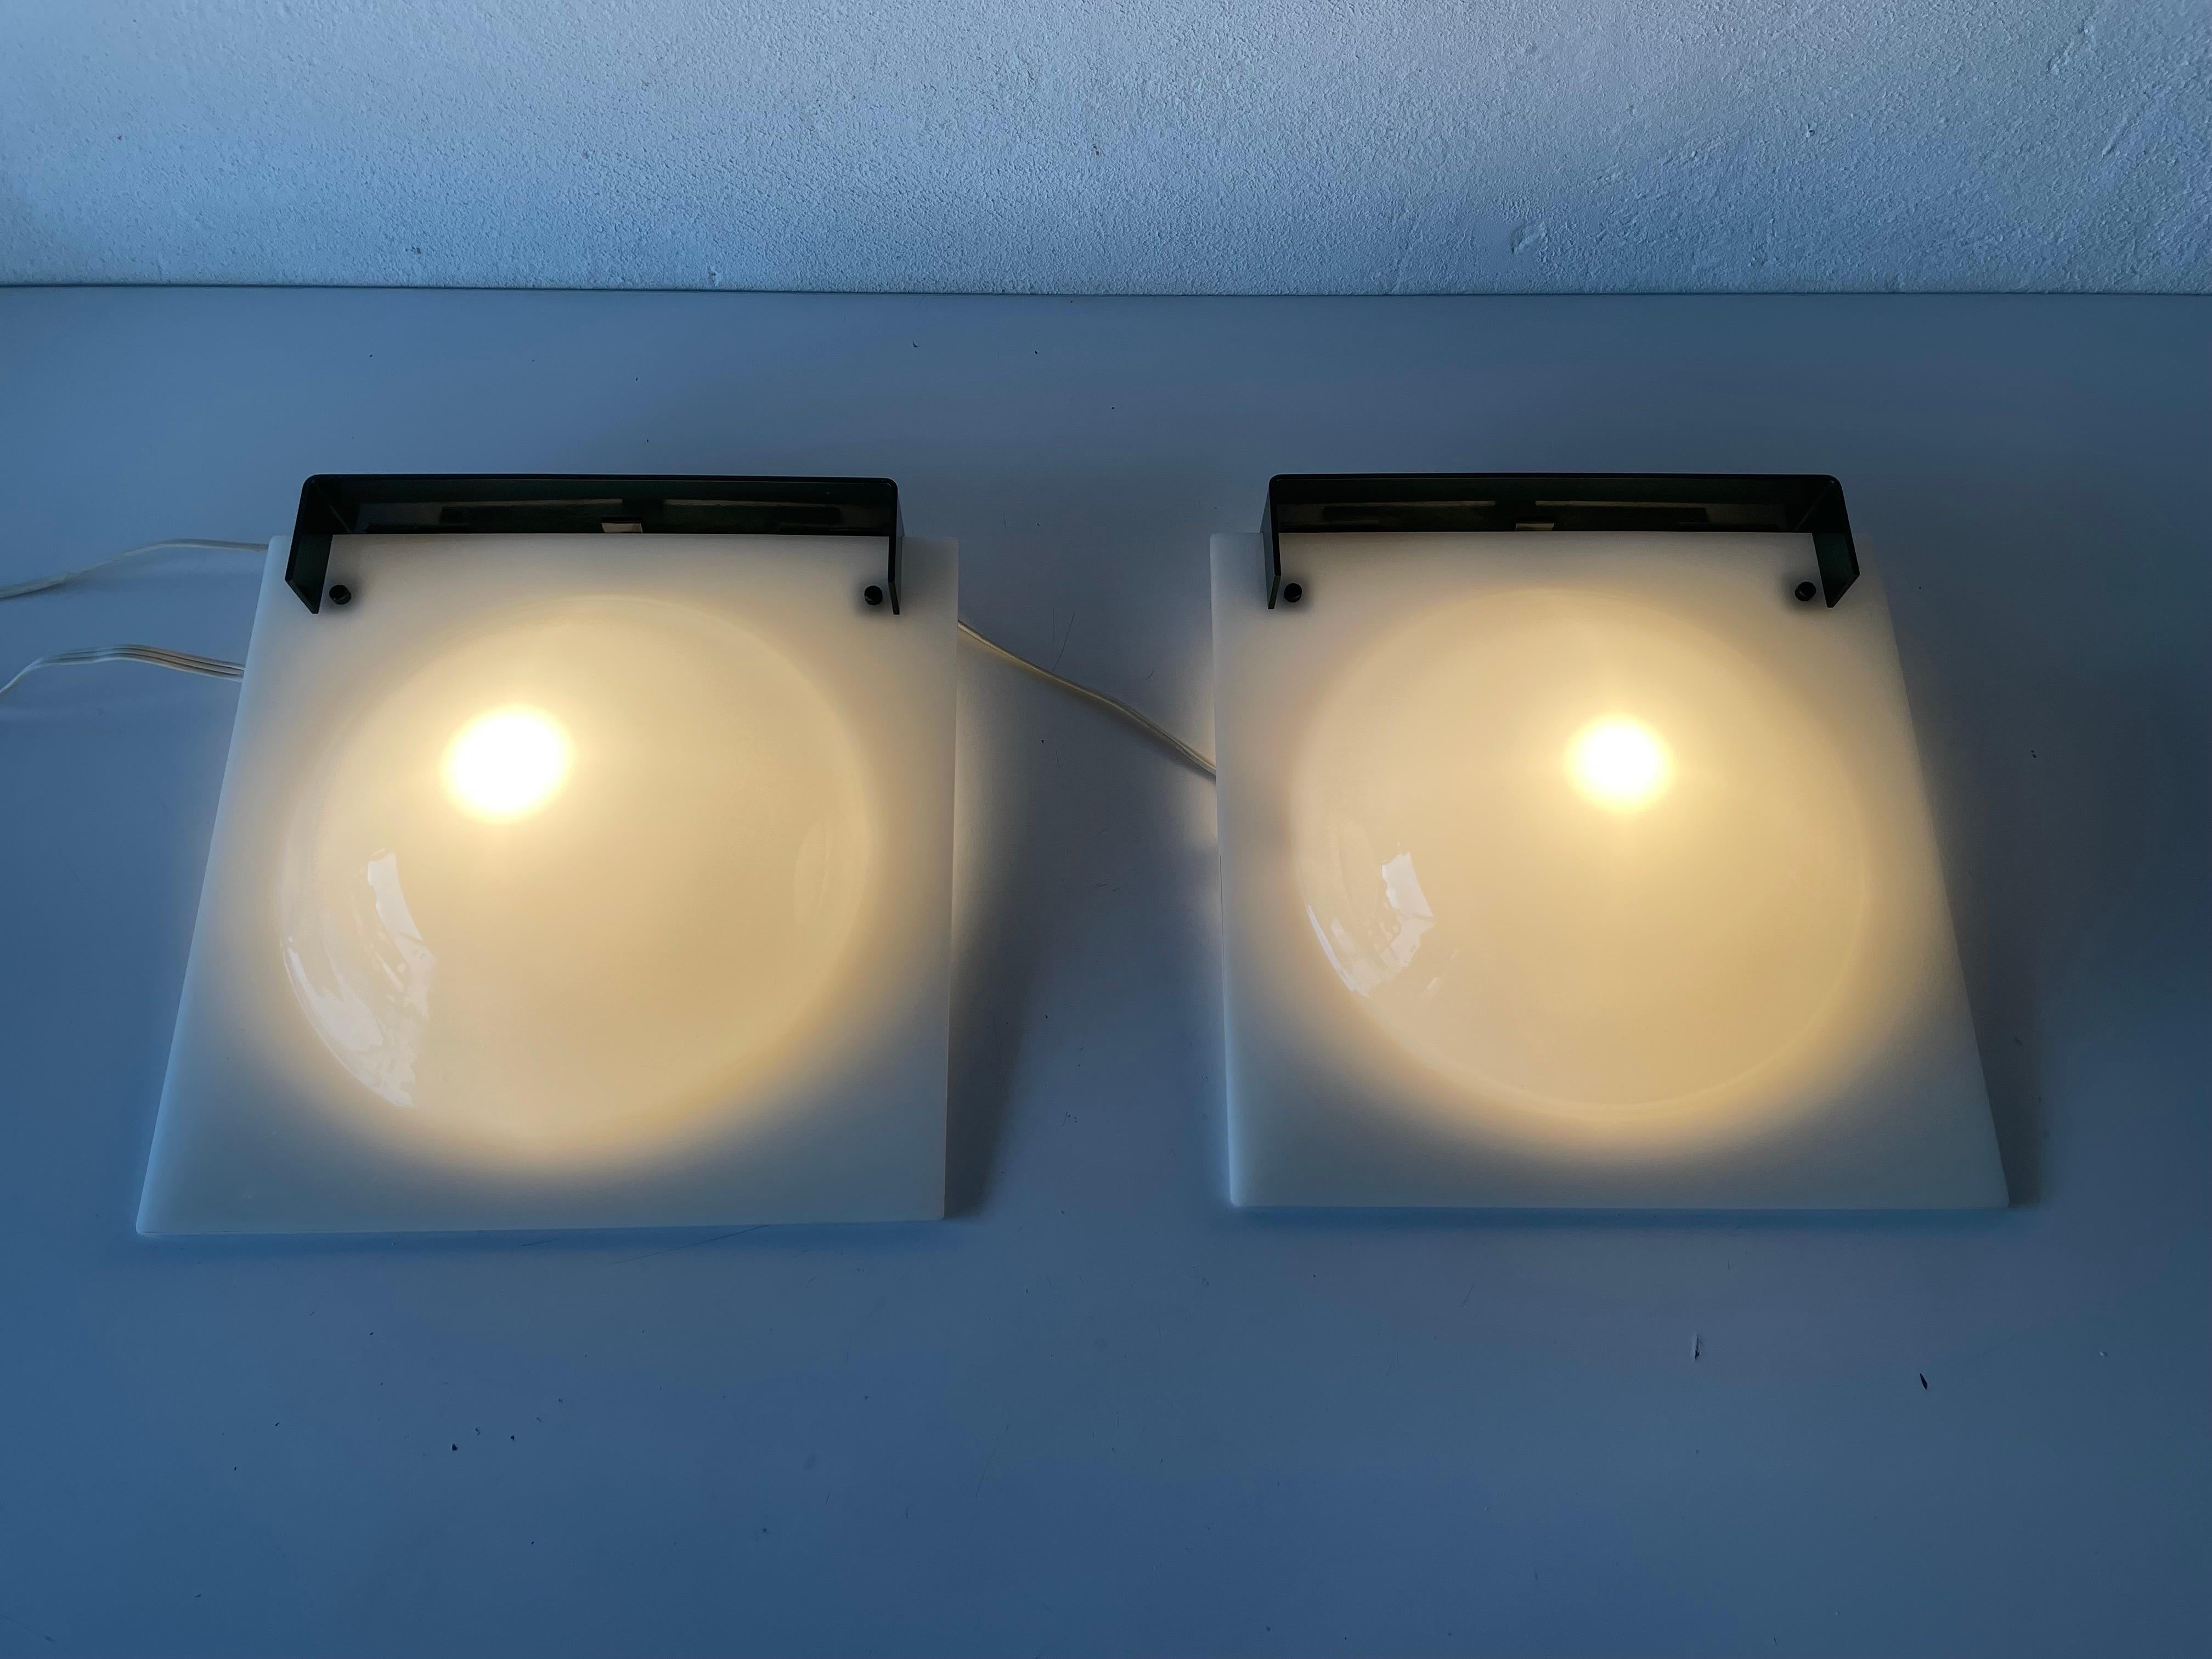 High Quality Plexiglass Bubble Design Pair of Wall Lamps, 1960s, Italy For Sale 5